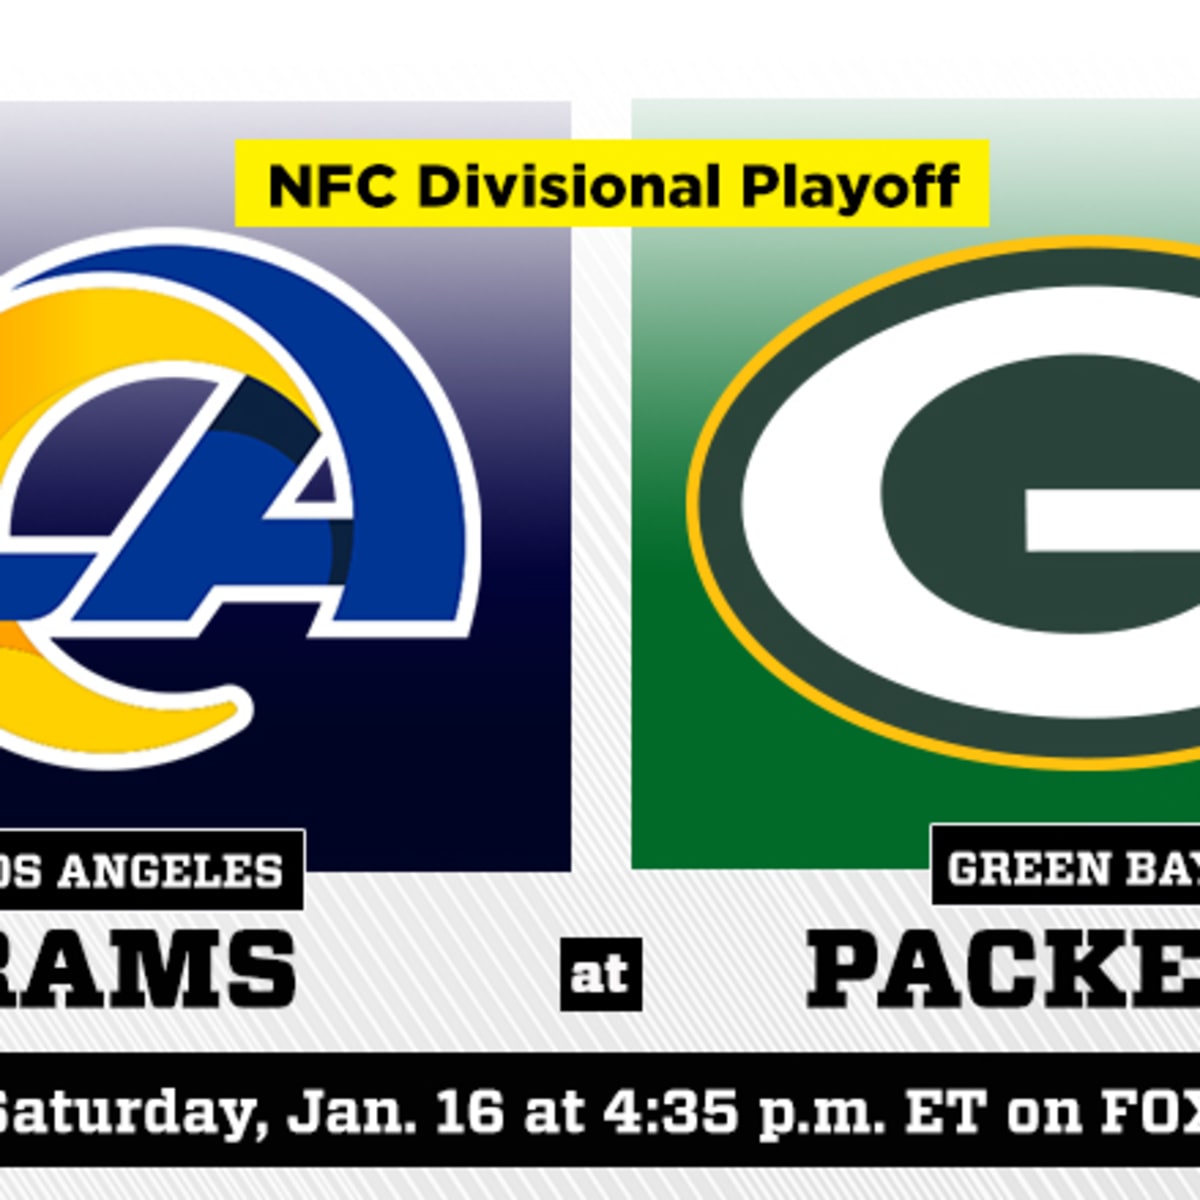 playoff tickets rams